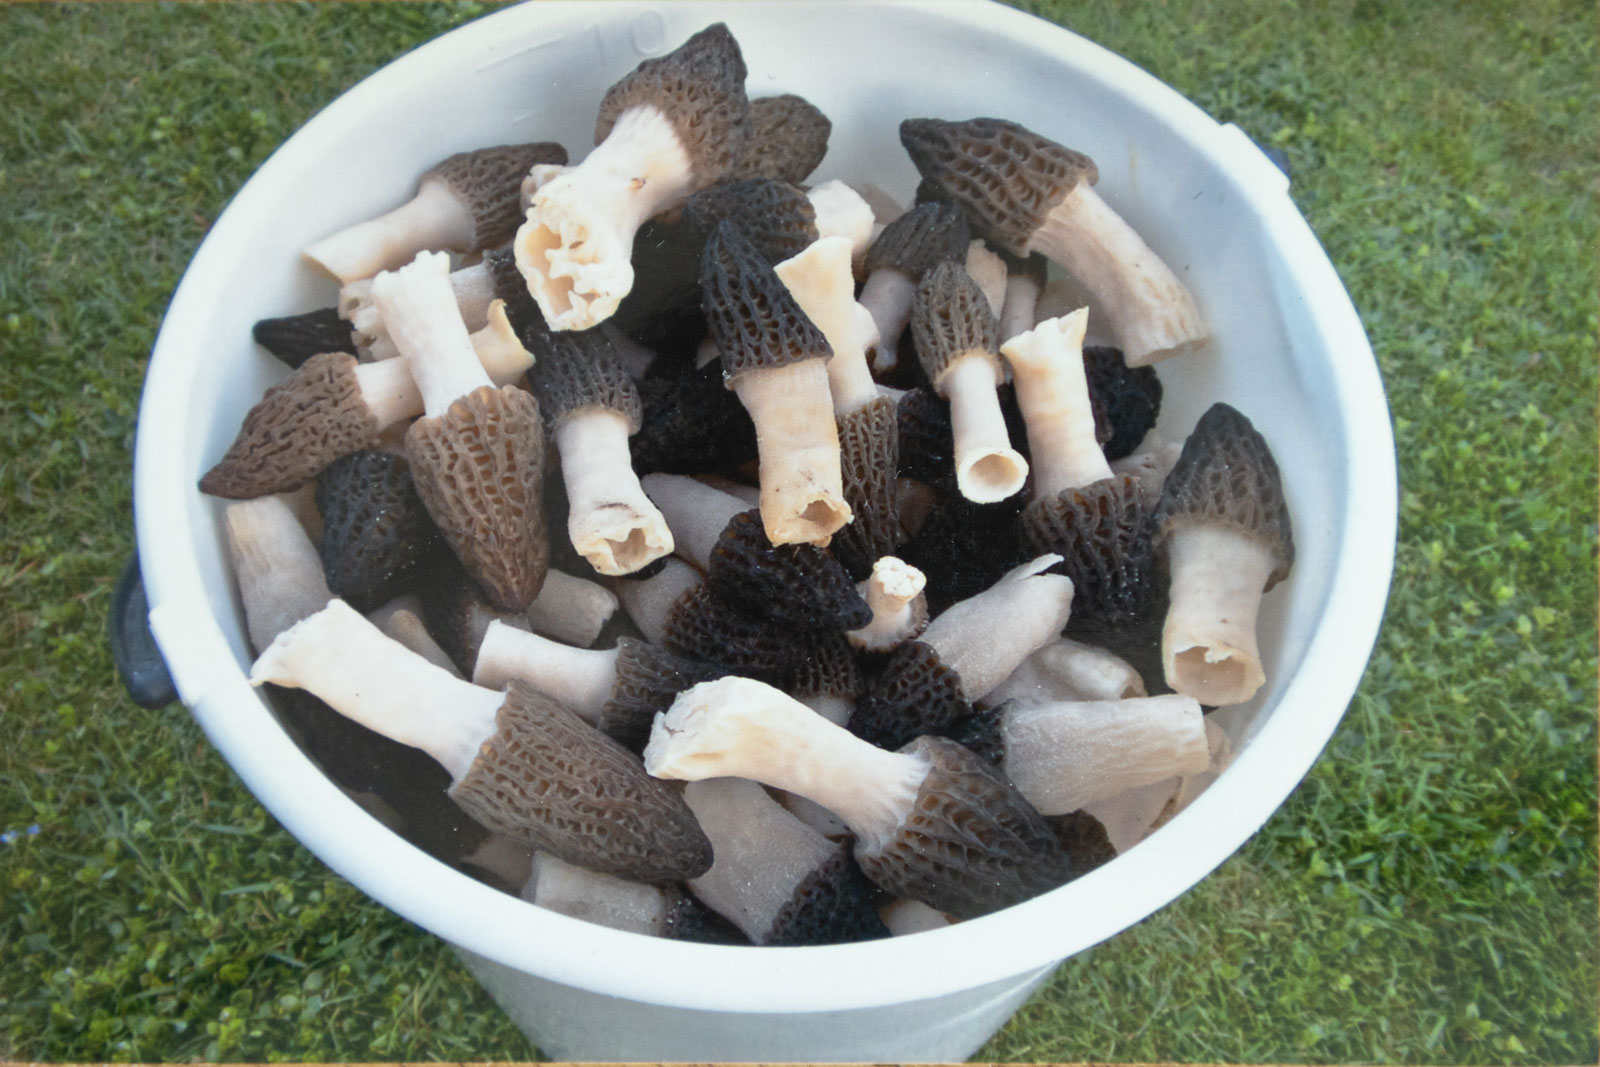 A bucket full of our very first cultivated black morels